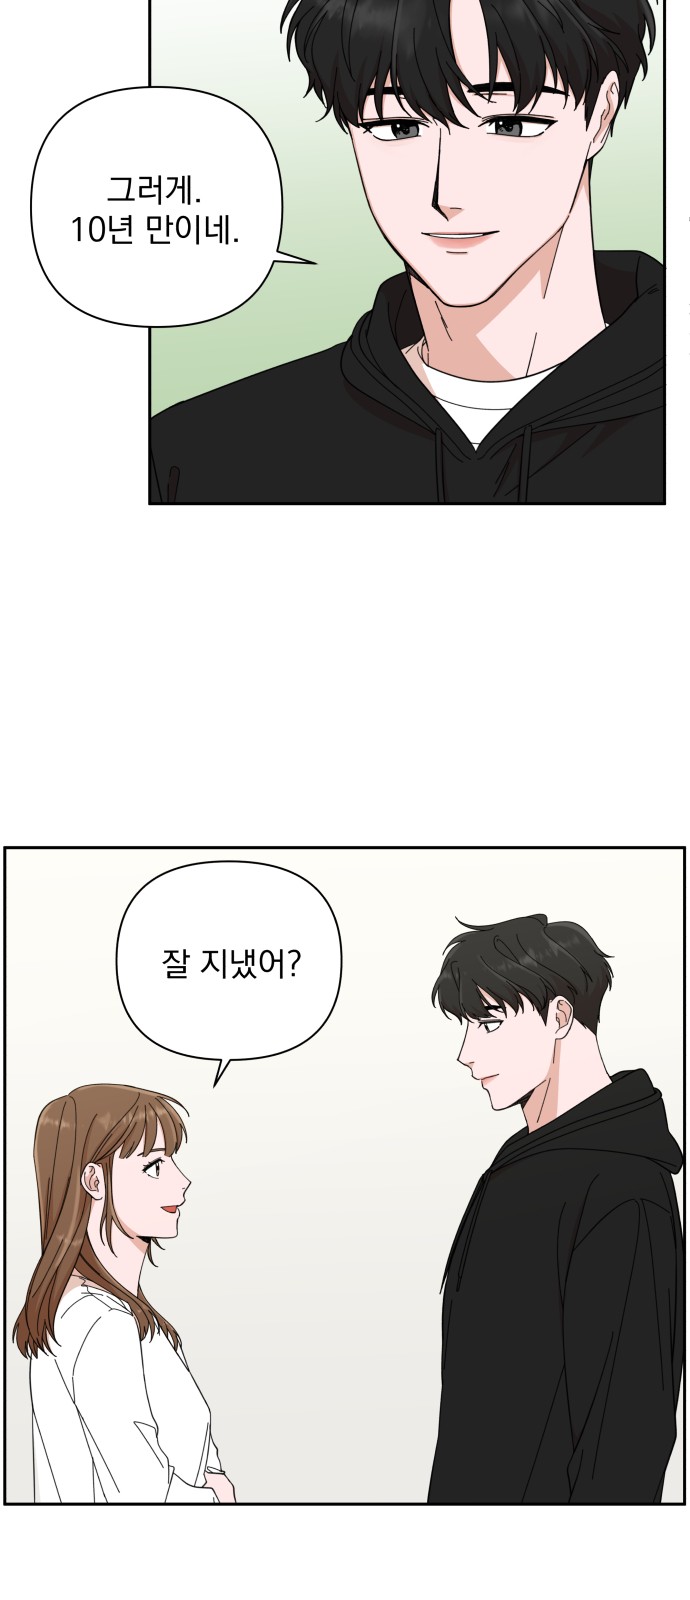 The Man With Pretty Lips - Chapter 2 - Page 4